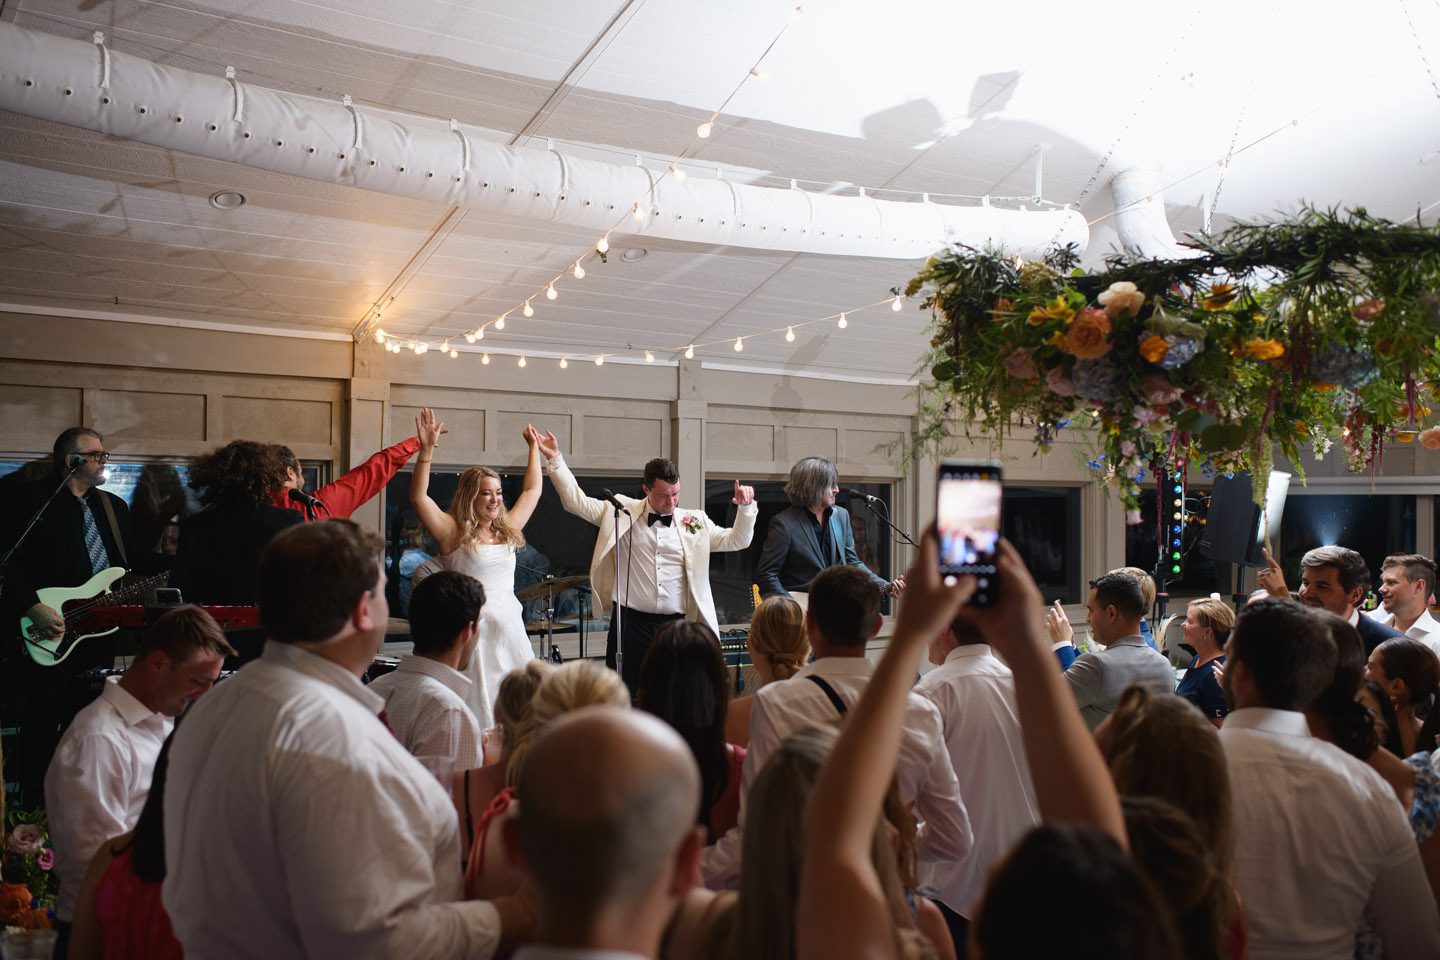 Fun and dancing at a lively Outer Banks wedding